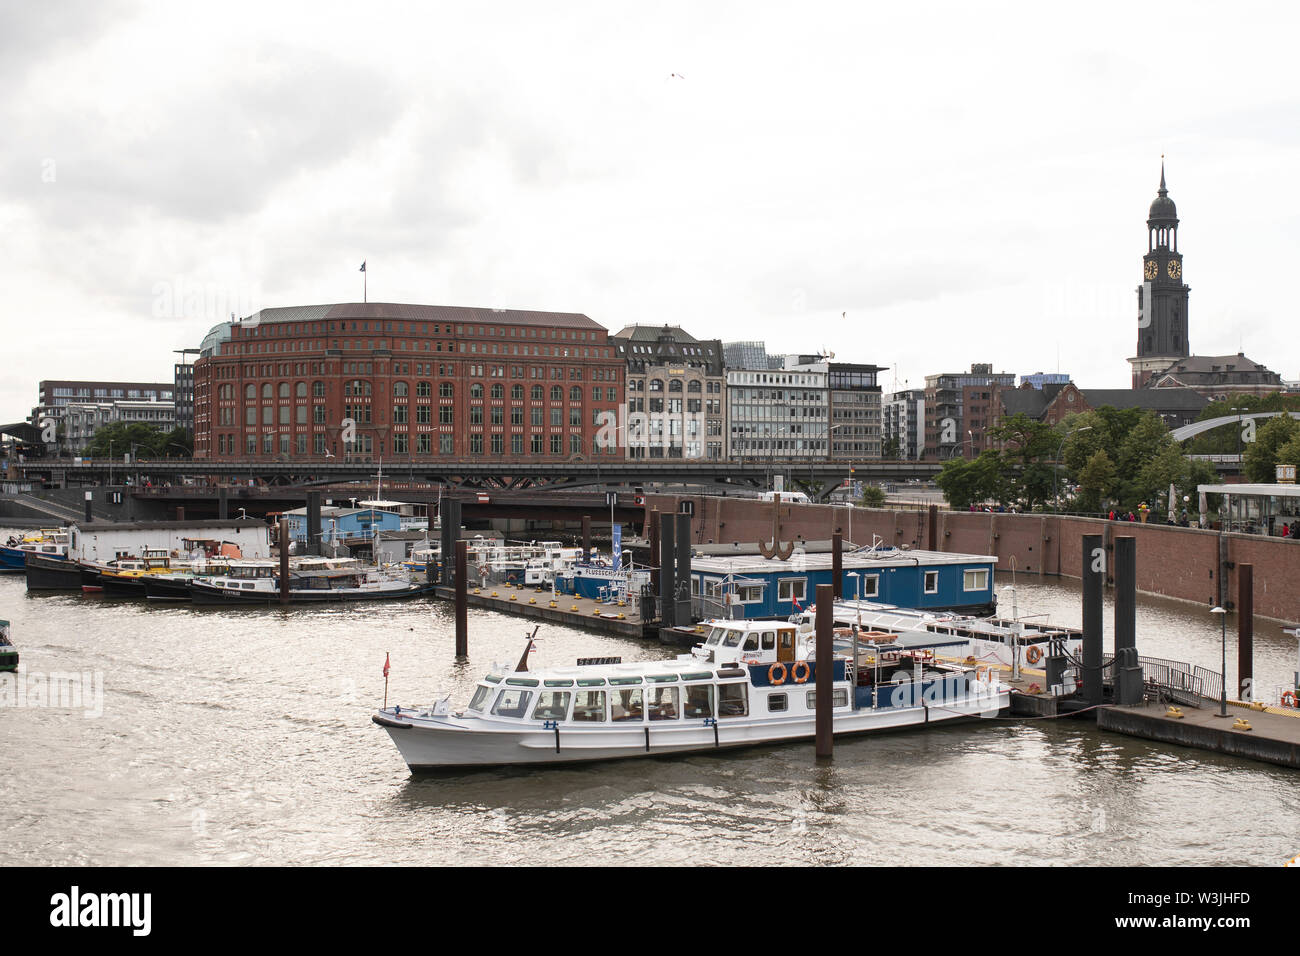 Boats in Binnenhafen canal looking toward Otto-Sill-Brücke bridge in the Hafencity area of Hamburg, Germany, with St Michaels church in the background. Stock Photo